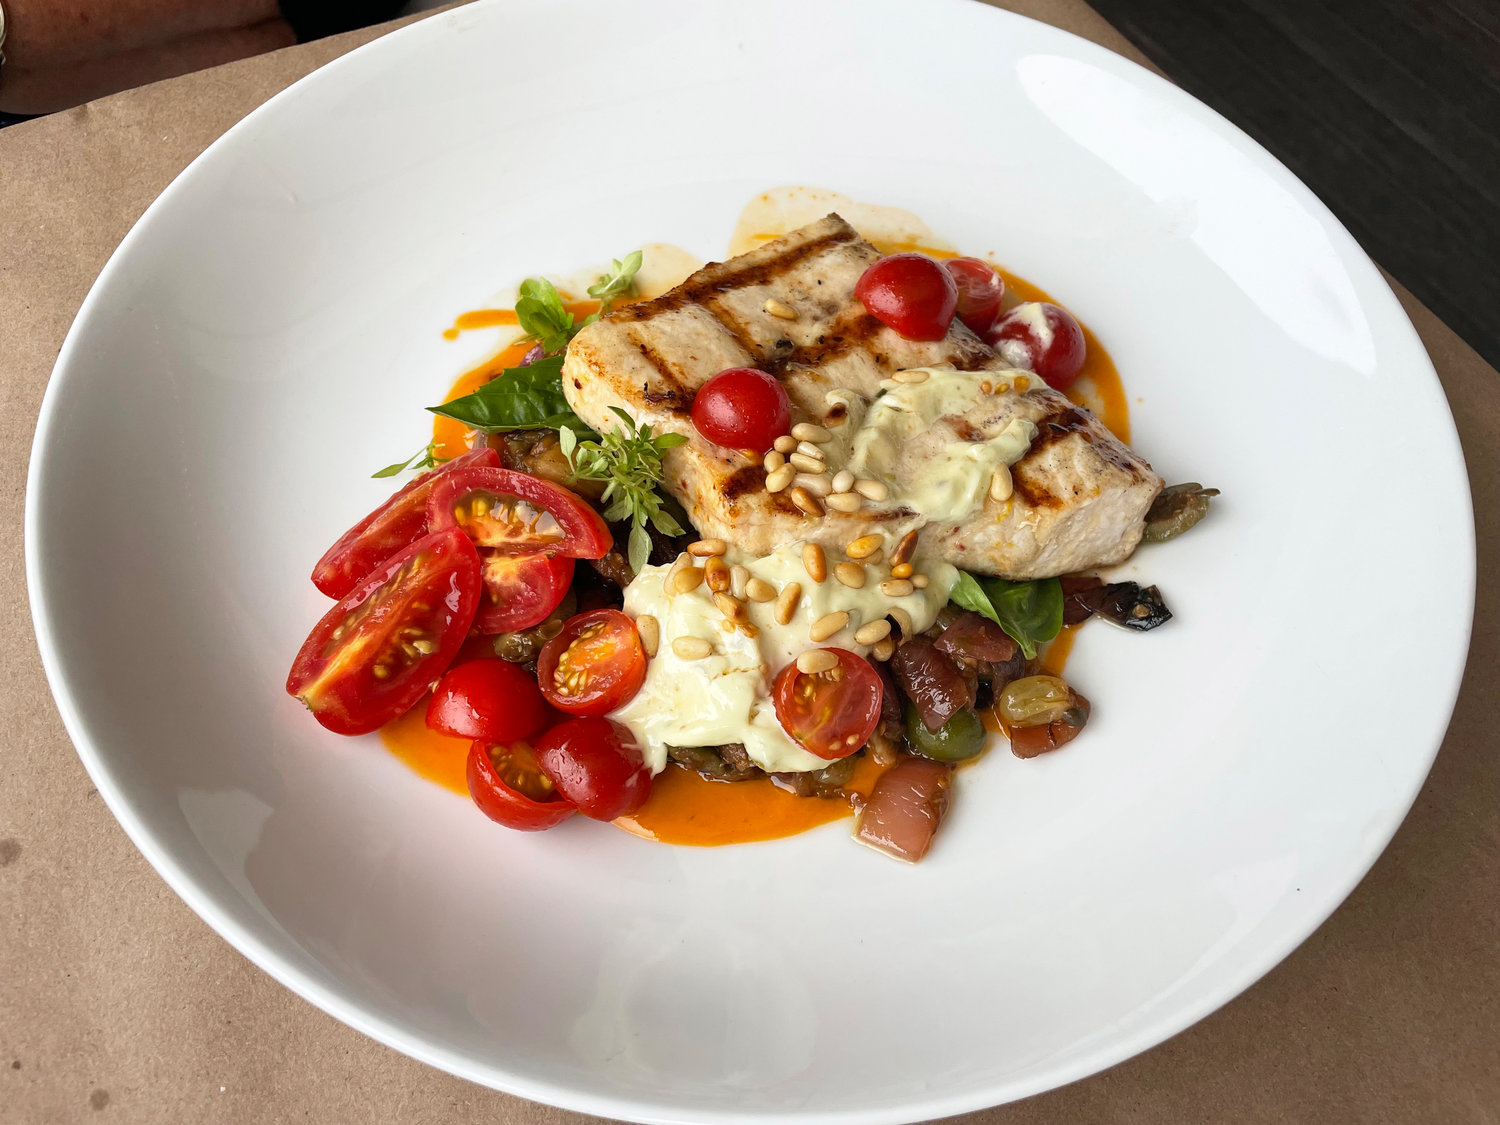 Straight Wharf Restaurant’s swordfish is grilled over a wood fire and served with an eggplant caponata, and garnished with cherry tomatoes, pine nuts and a caper aioli.